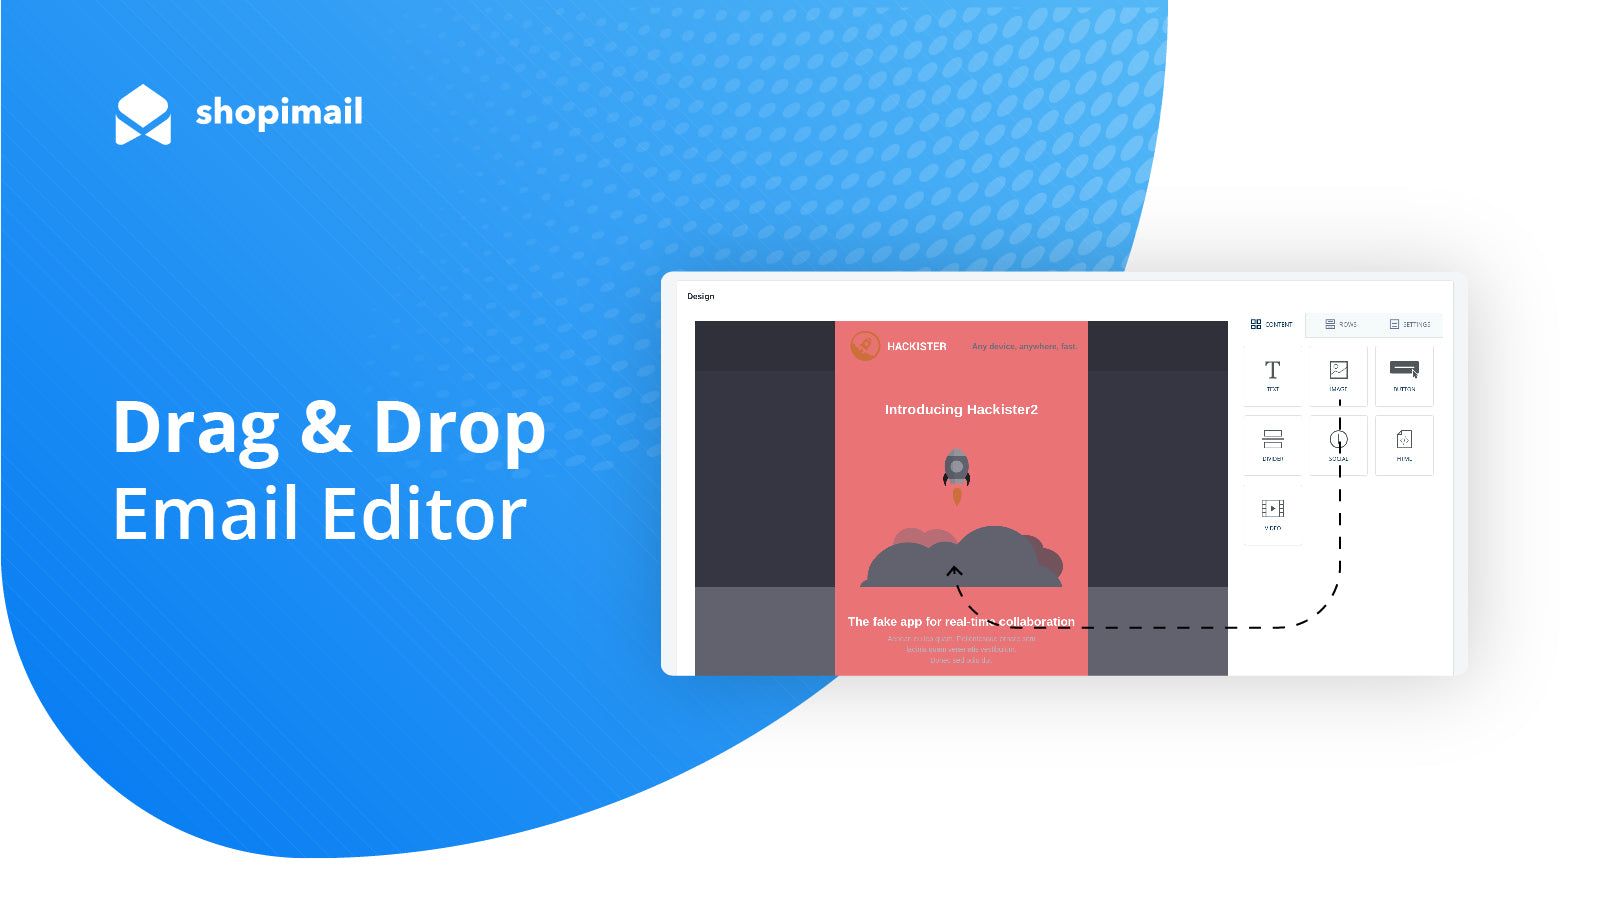 Drag & drop email editor